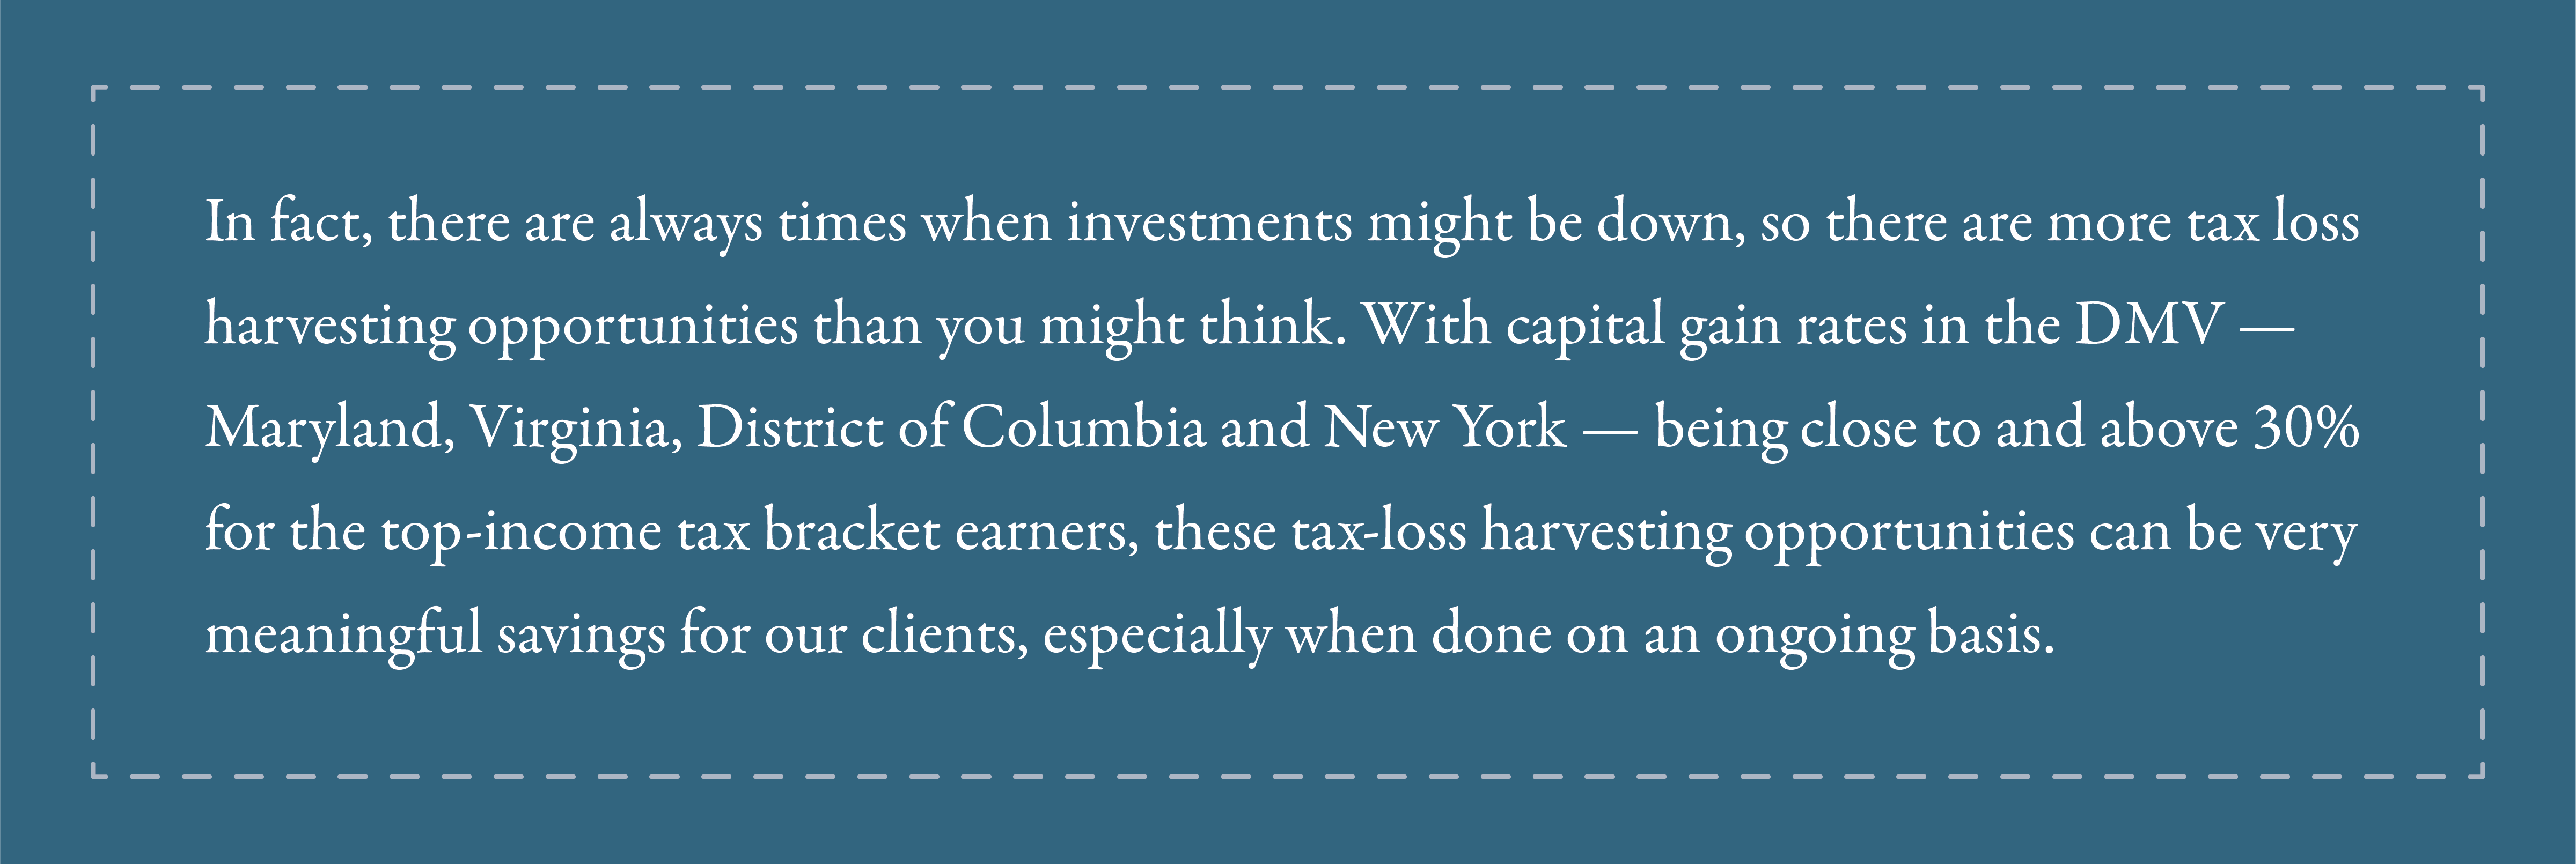 In fact, there are always times when investments might be down, so there are more tax loss harvesting opportunities than you might think. With capital gain rates in the DMV — Maryland, Virginia, District of Columbia and New York — being close to....